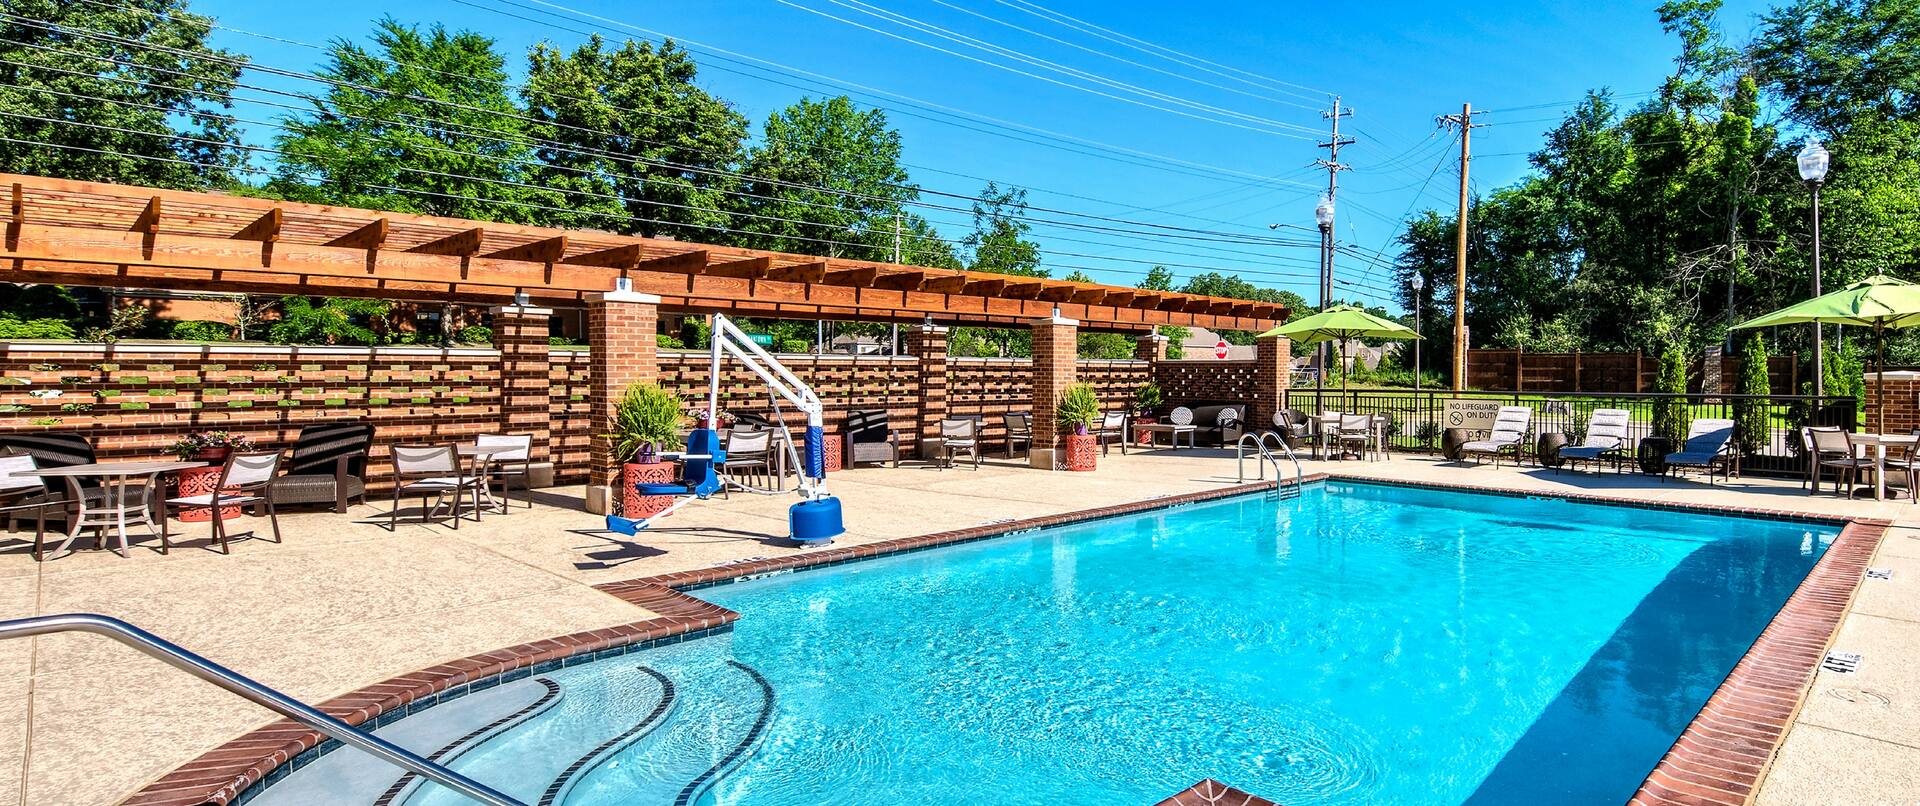 Patio and Outdoor Pool